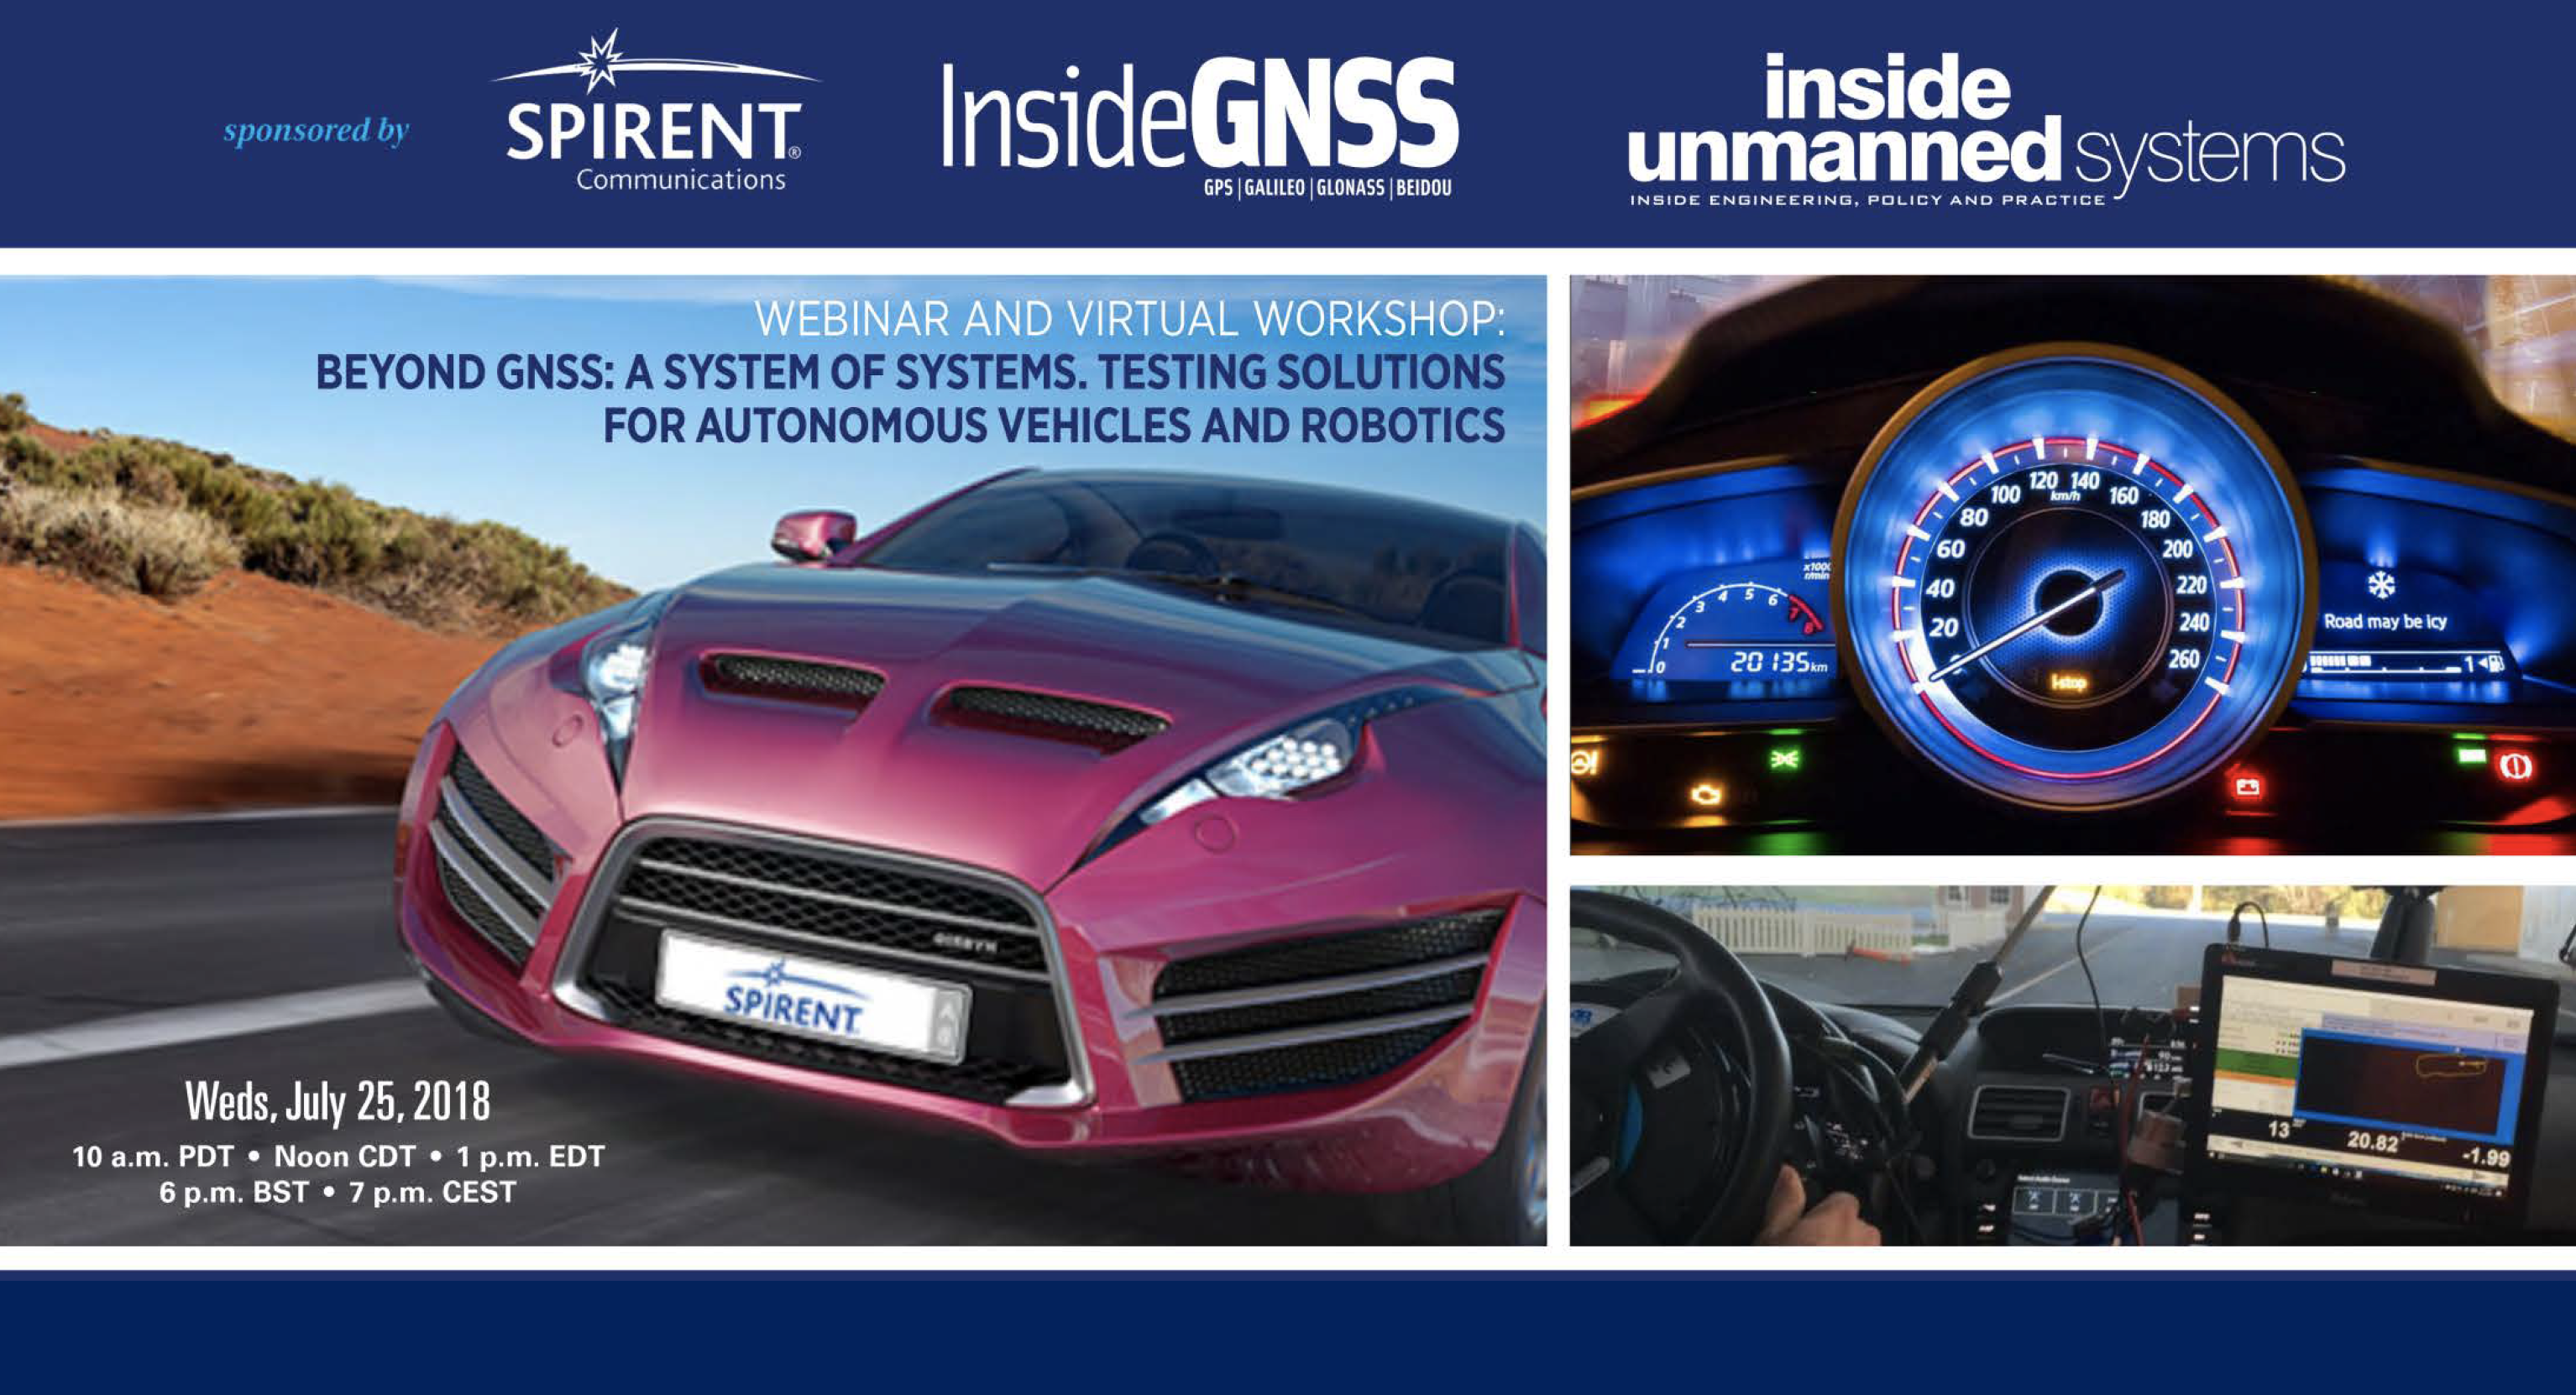 Beyond GNSS: A System of Systems Virtual Workshop Now Available On-Demand